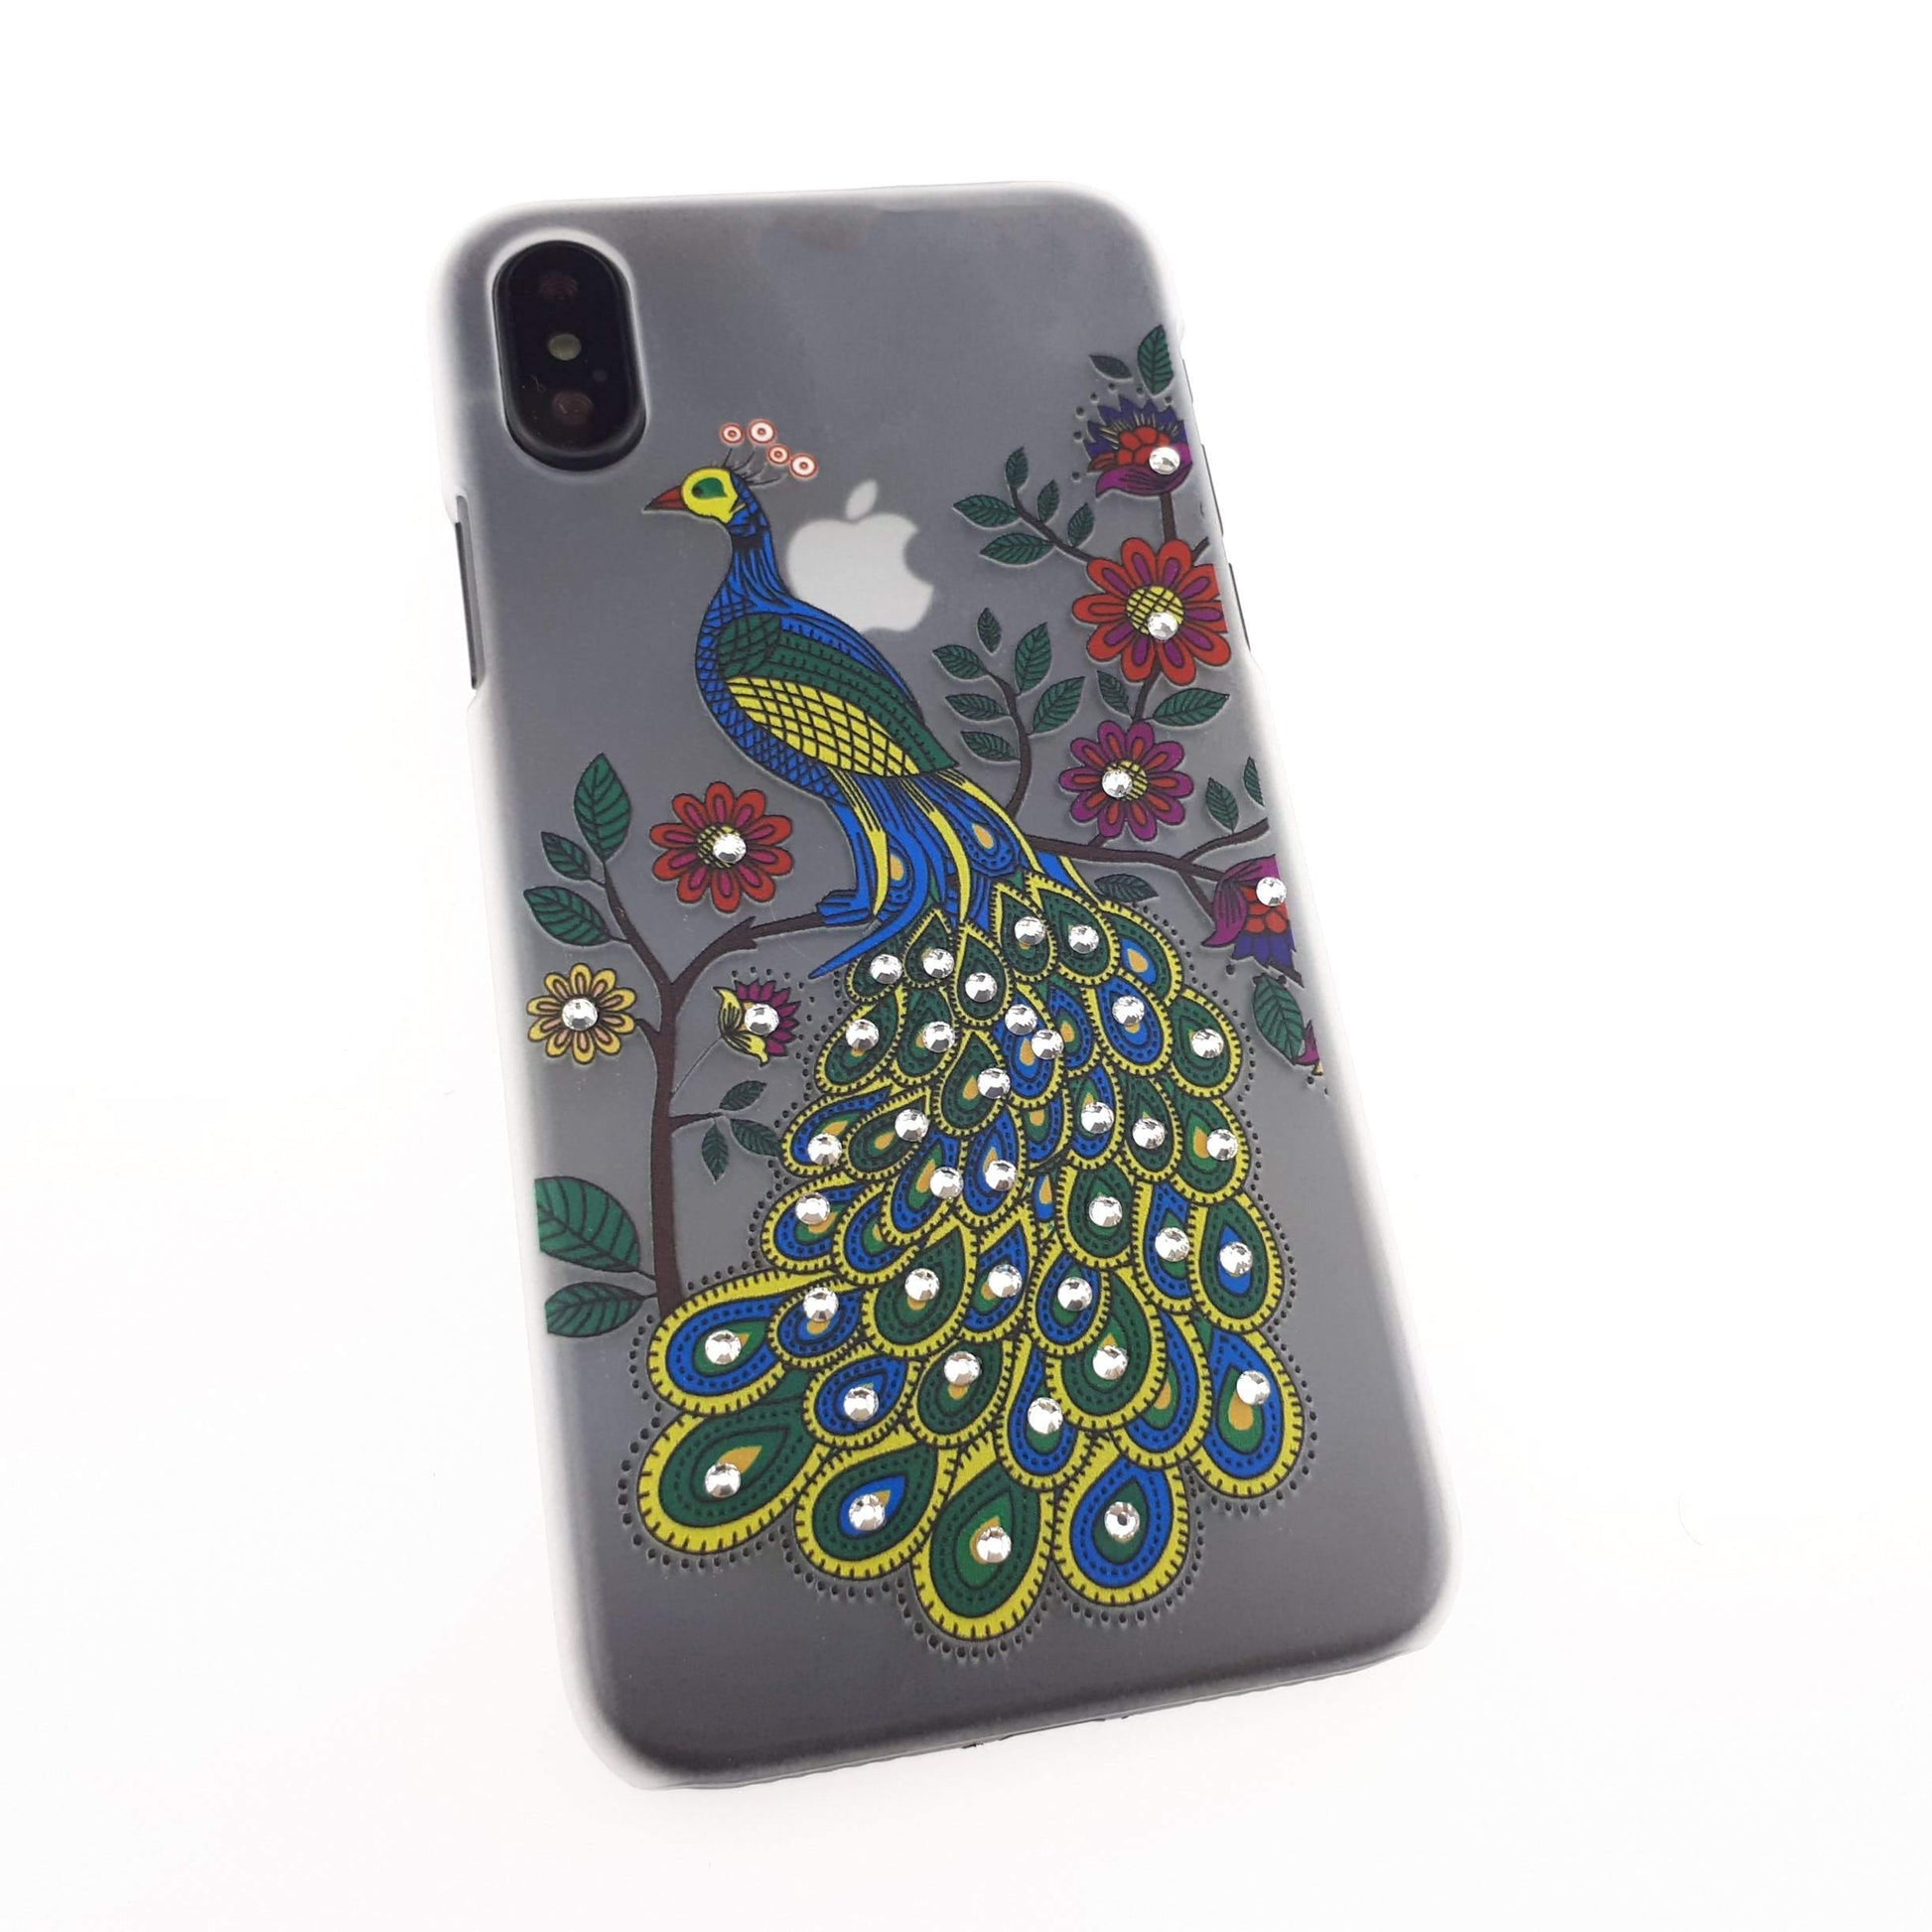 Peacock Design Case - iPhone X/Xs - PCMaster Pro 